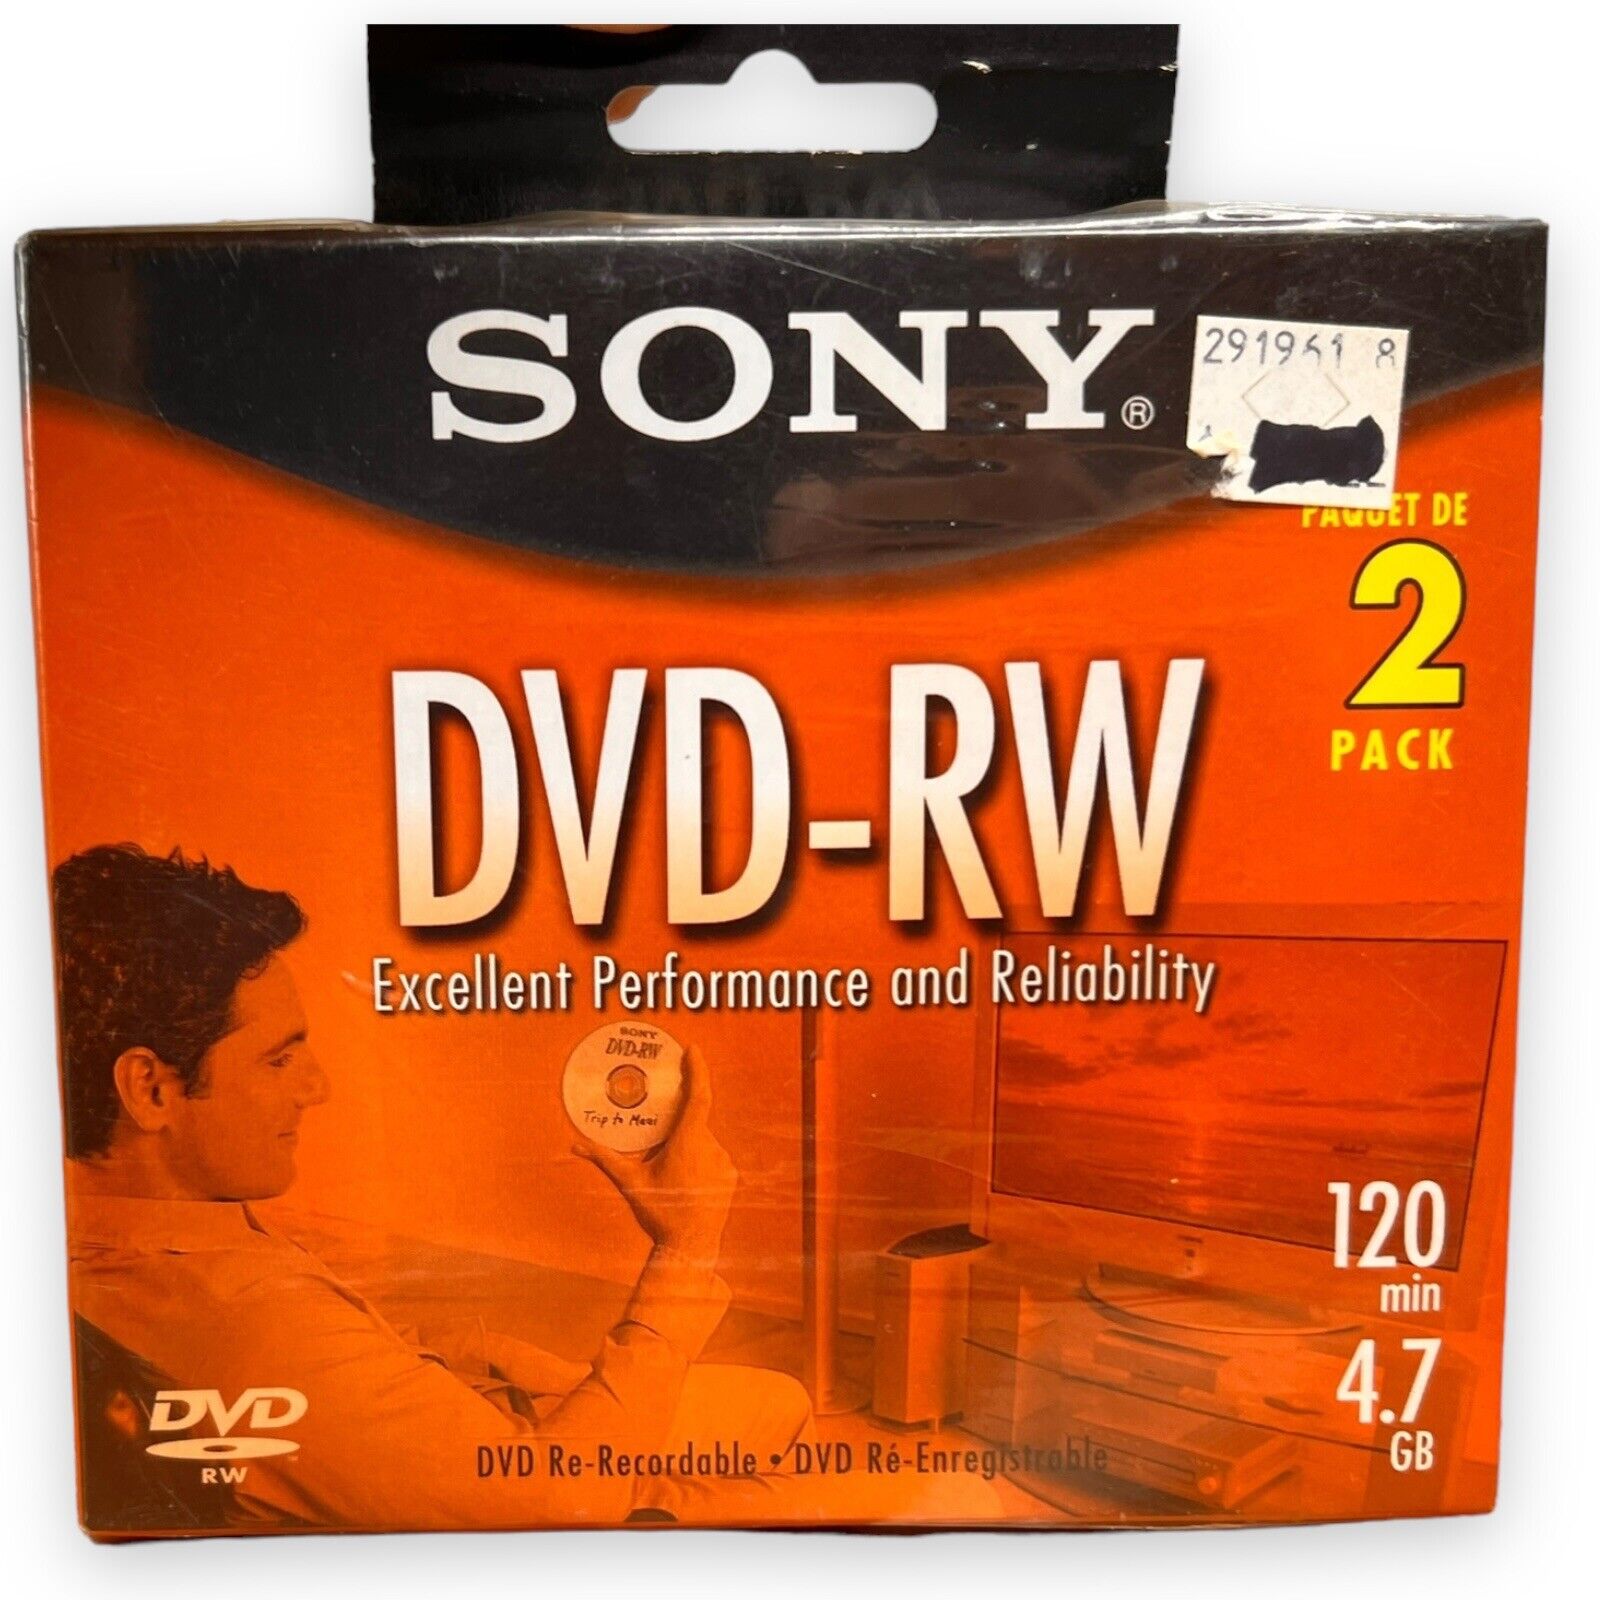 Sony DVD-RW 2 Pack Discs 120 min Re-Recordable 4.7 GB